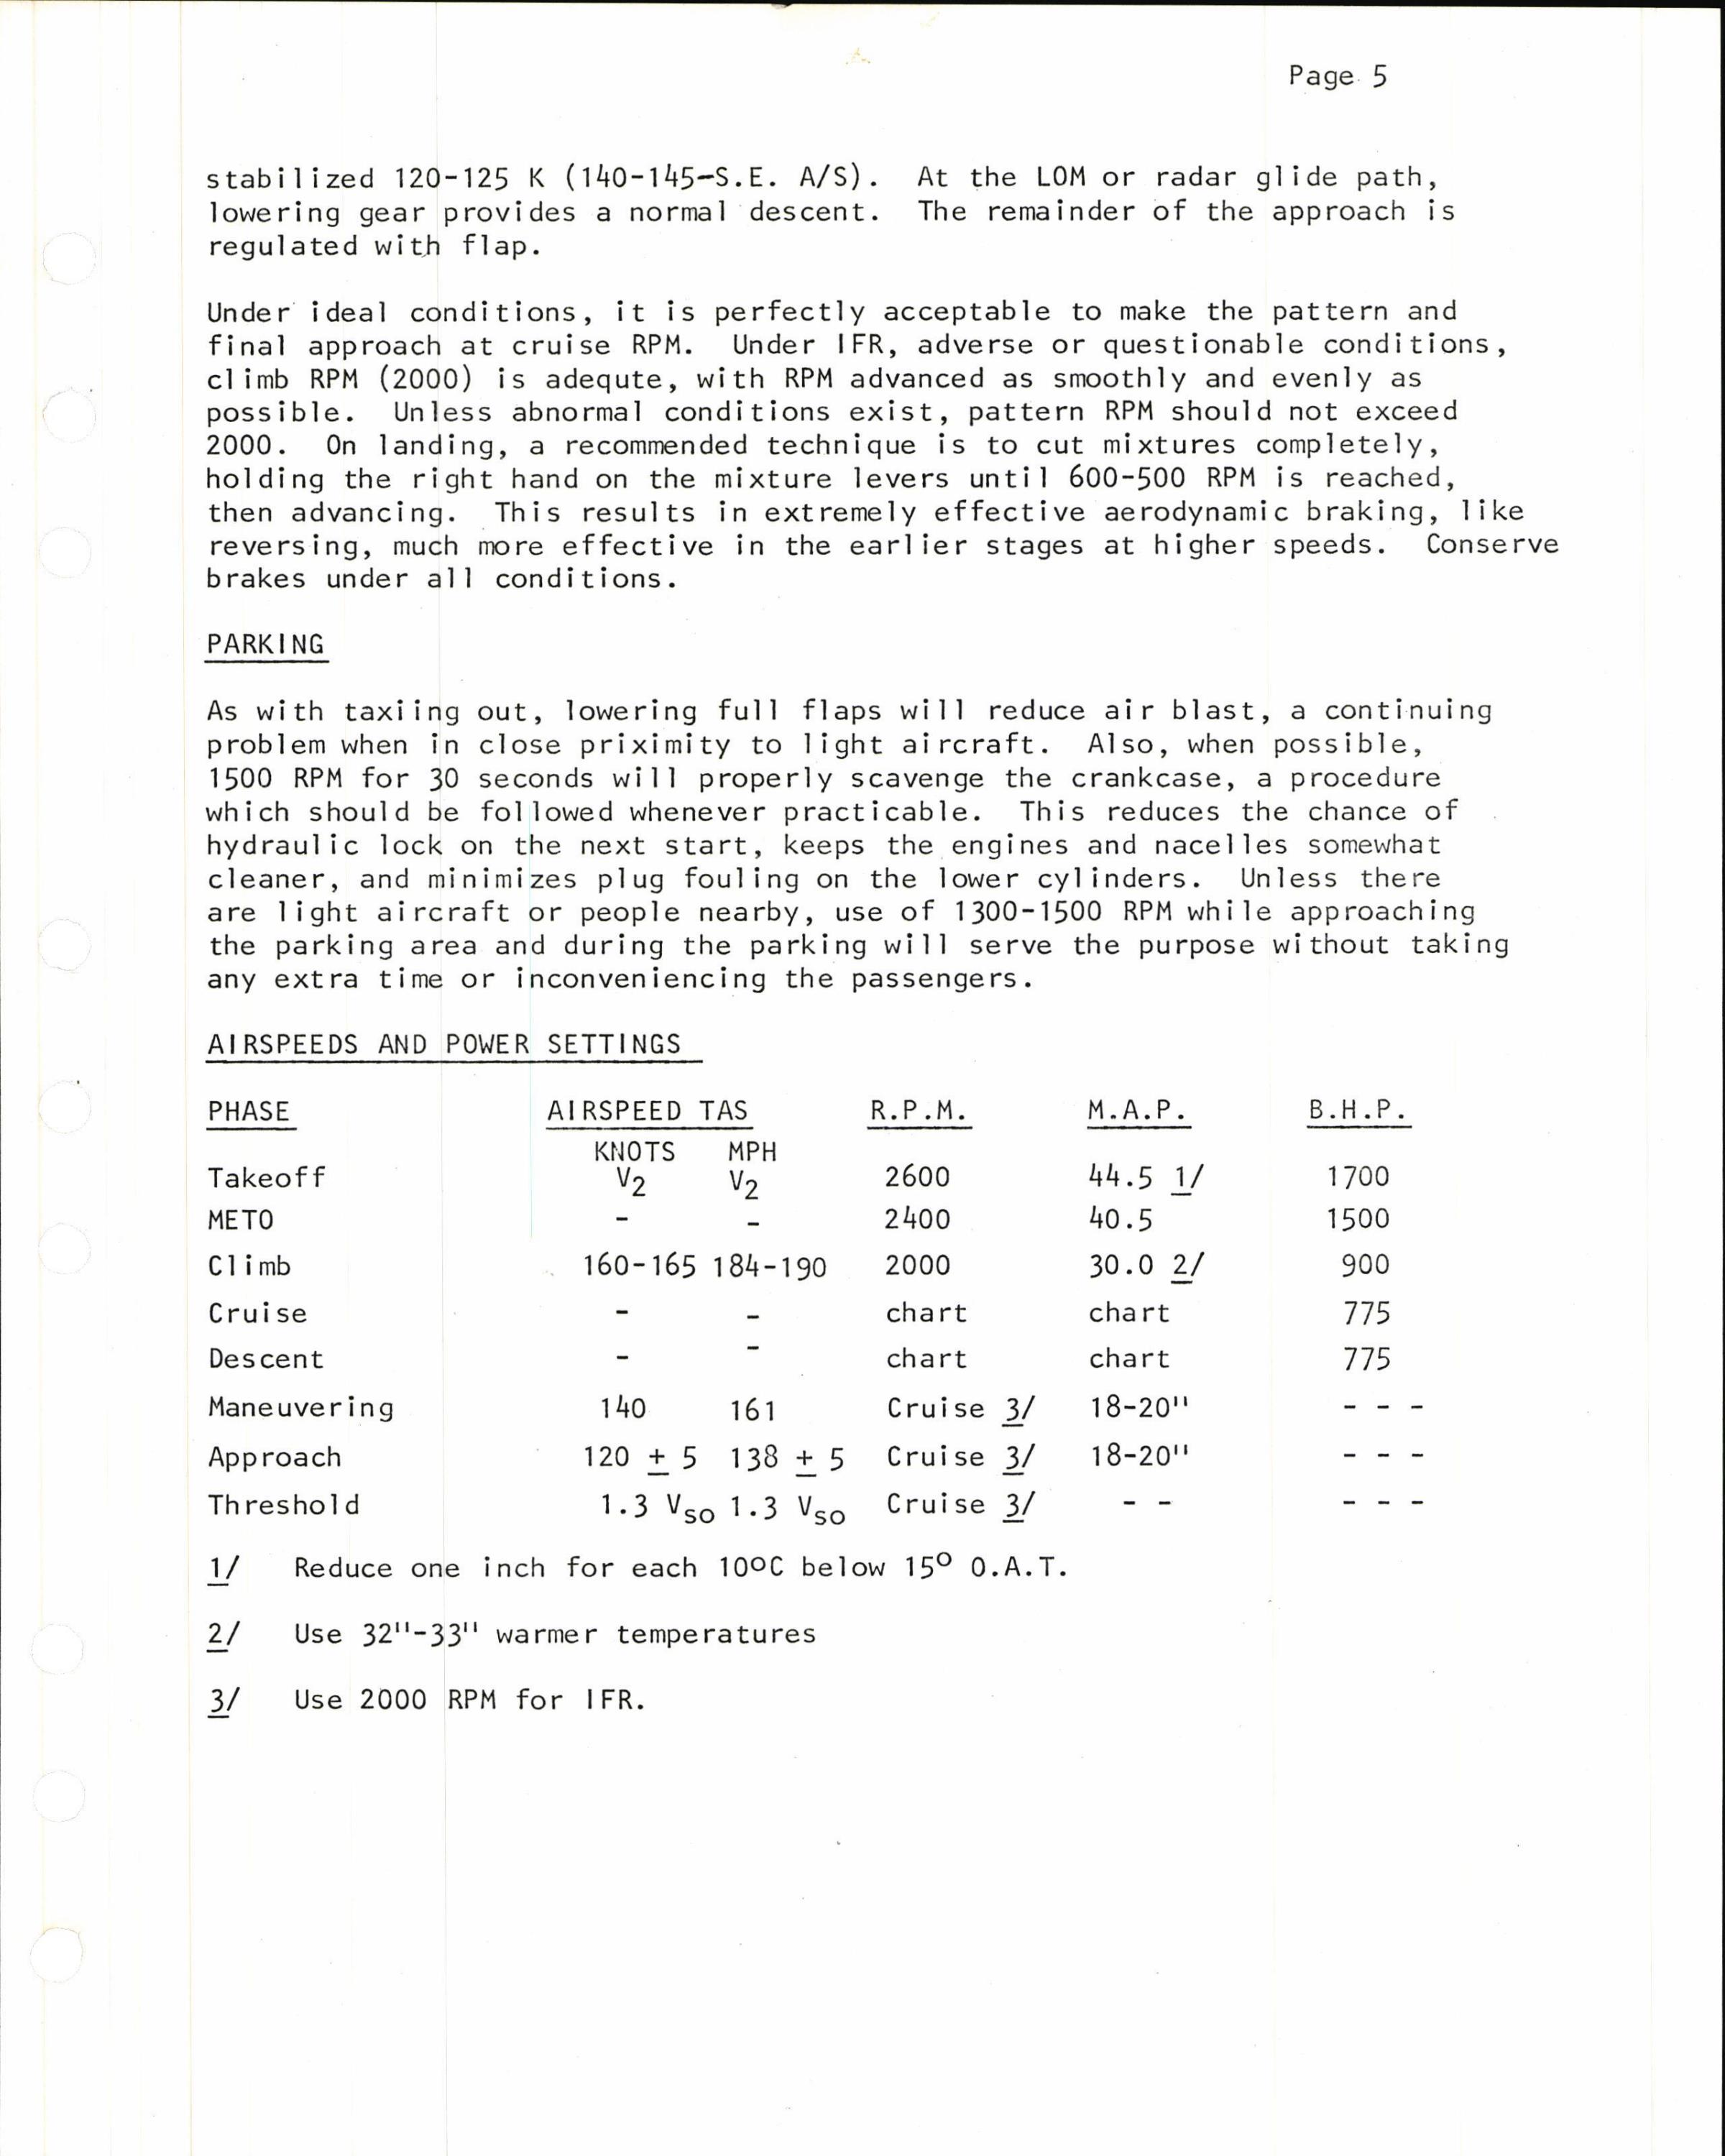 Sample page 5 from AirCorps Library document: Bendix Radio - B-25 Operating Procedures